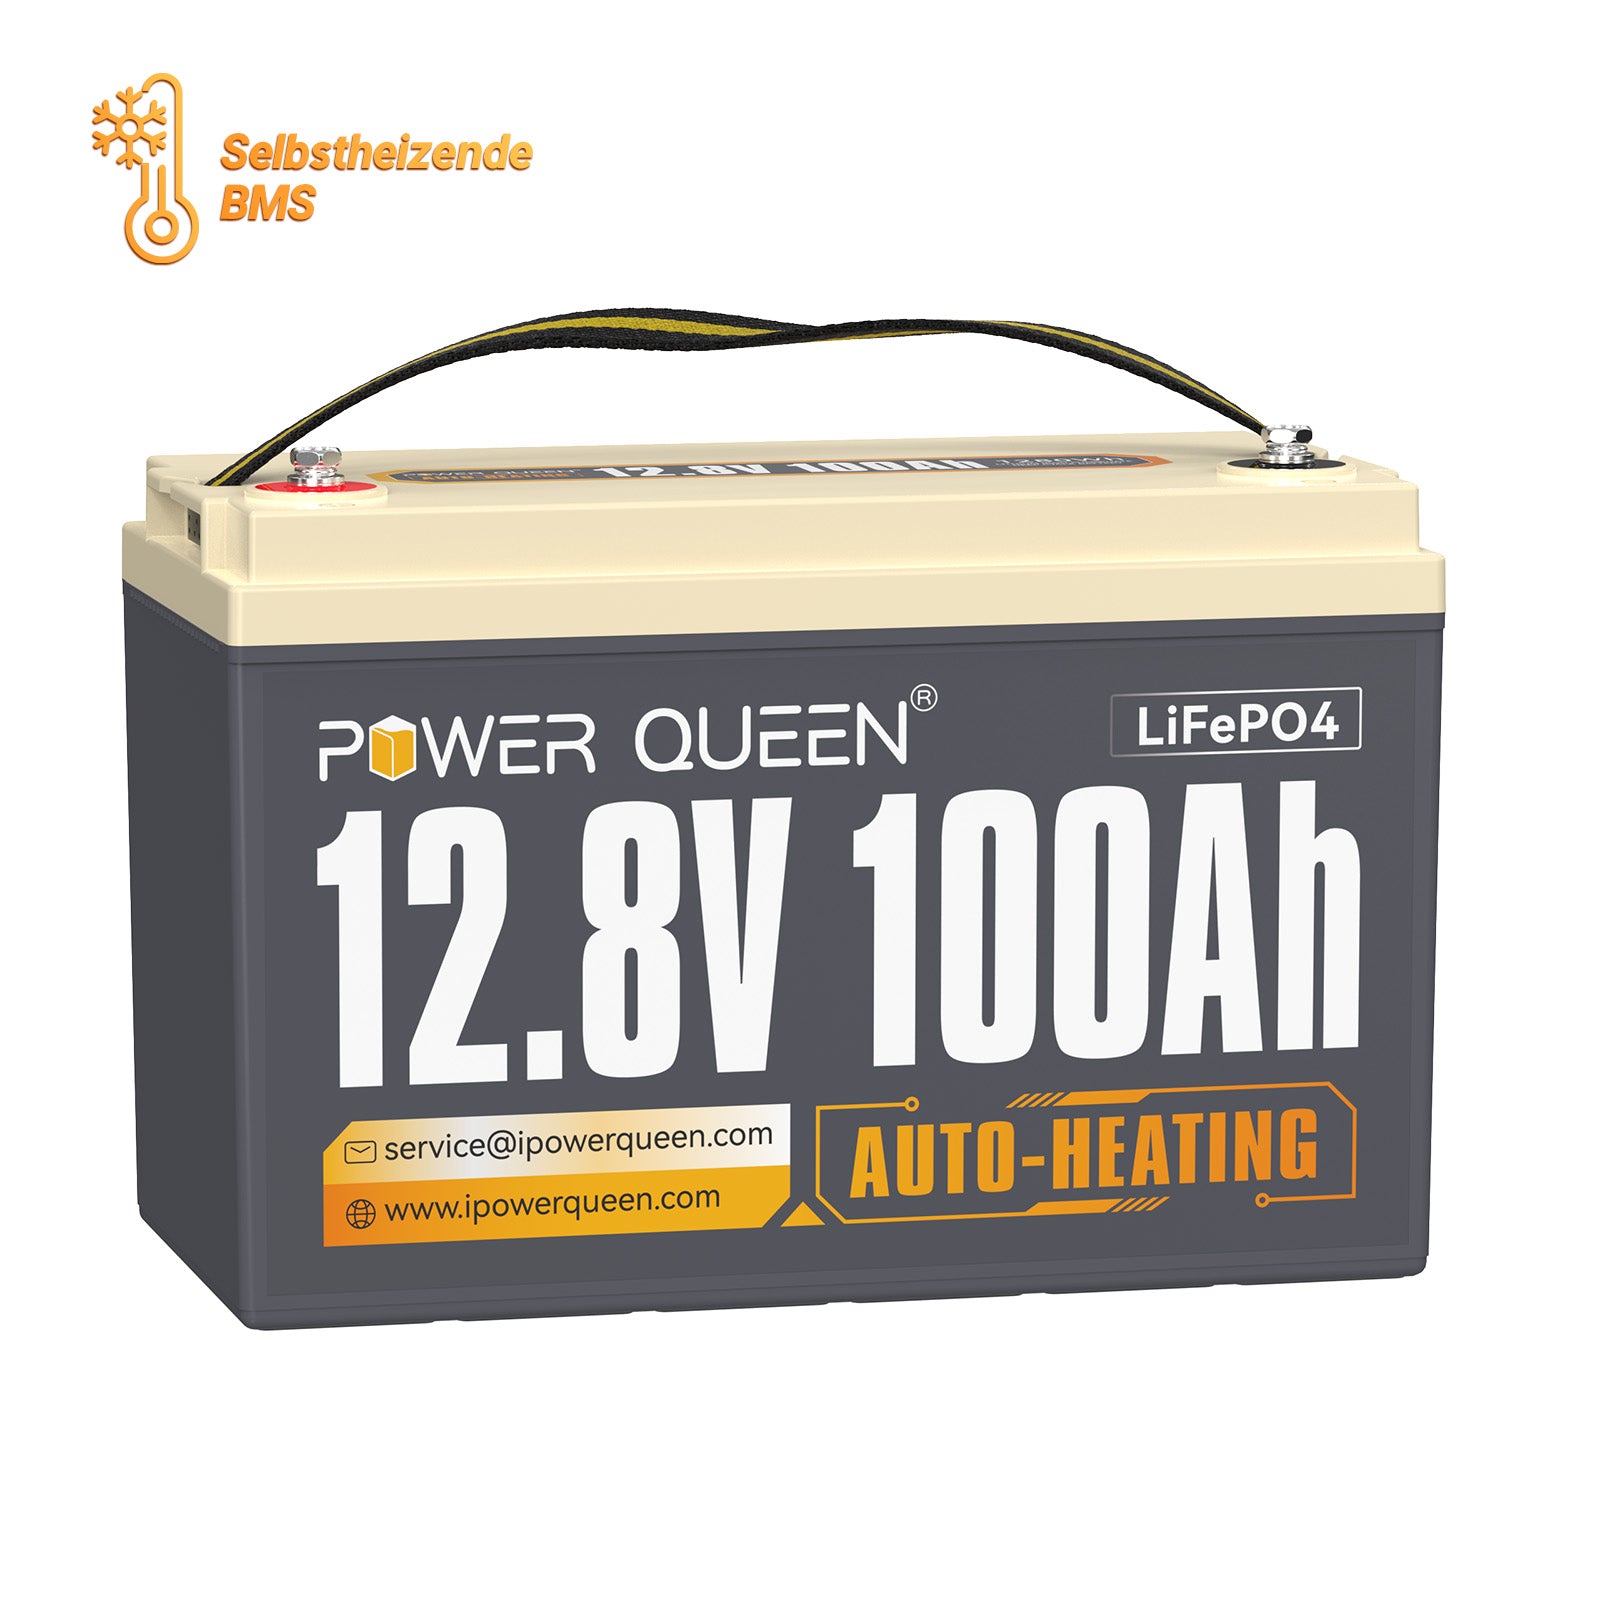 Power Queen 12.8V 100Ah Self-Heating LiFePO4 Battery, Built-in 100A BMS